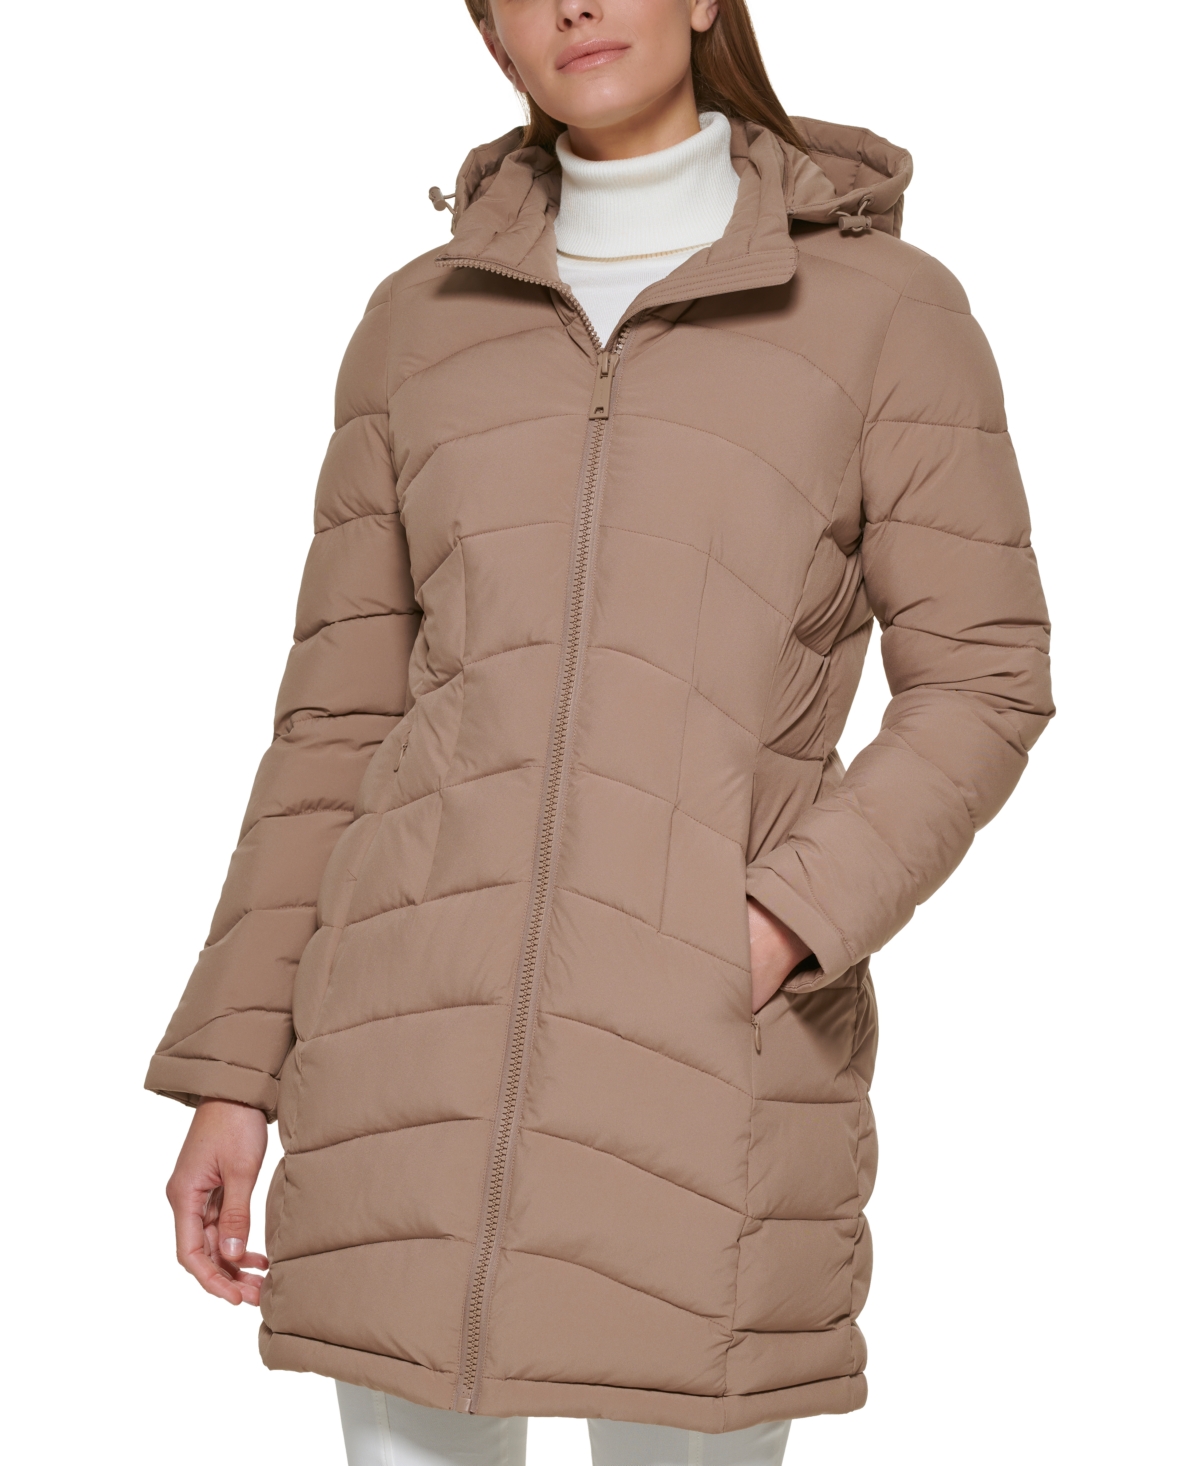 Calvin Klein Women's Hooded Packable Puffer Coat, Created for Macy's